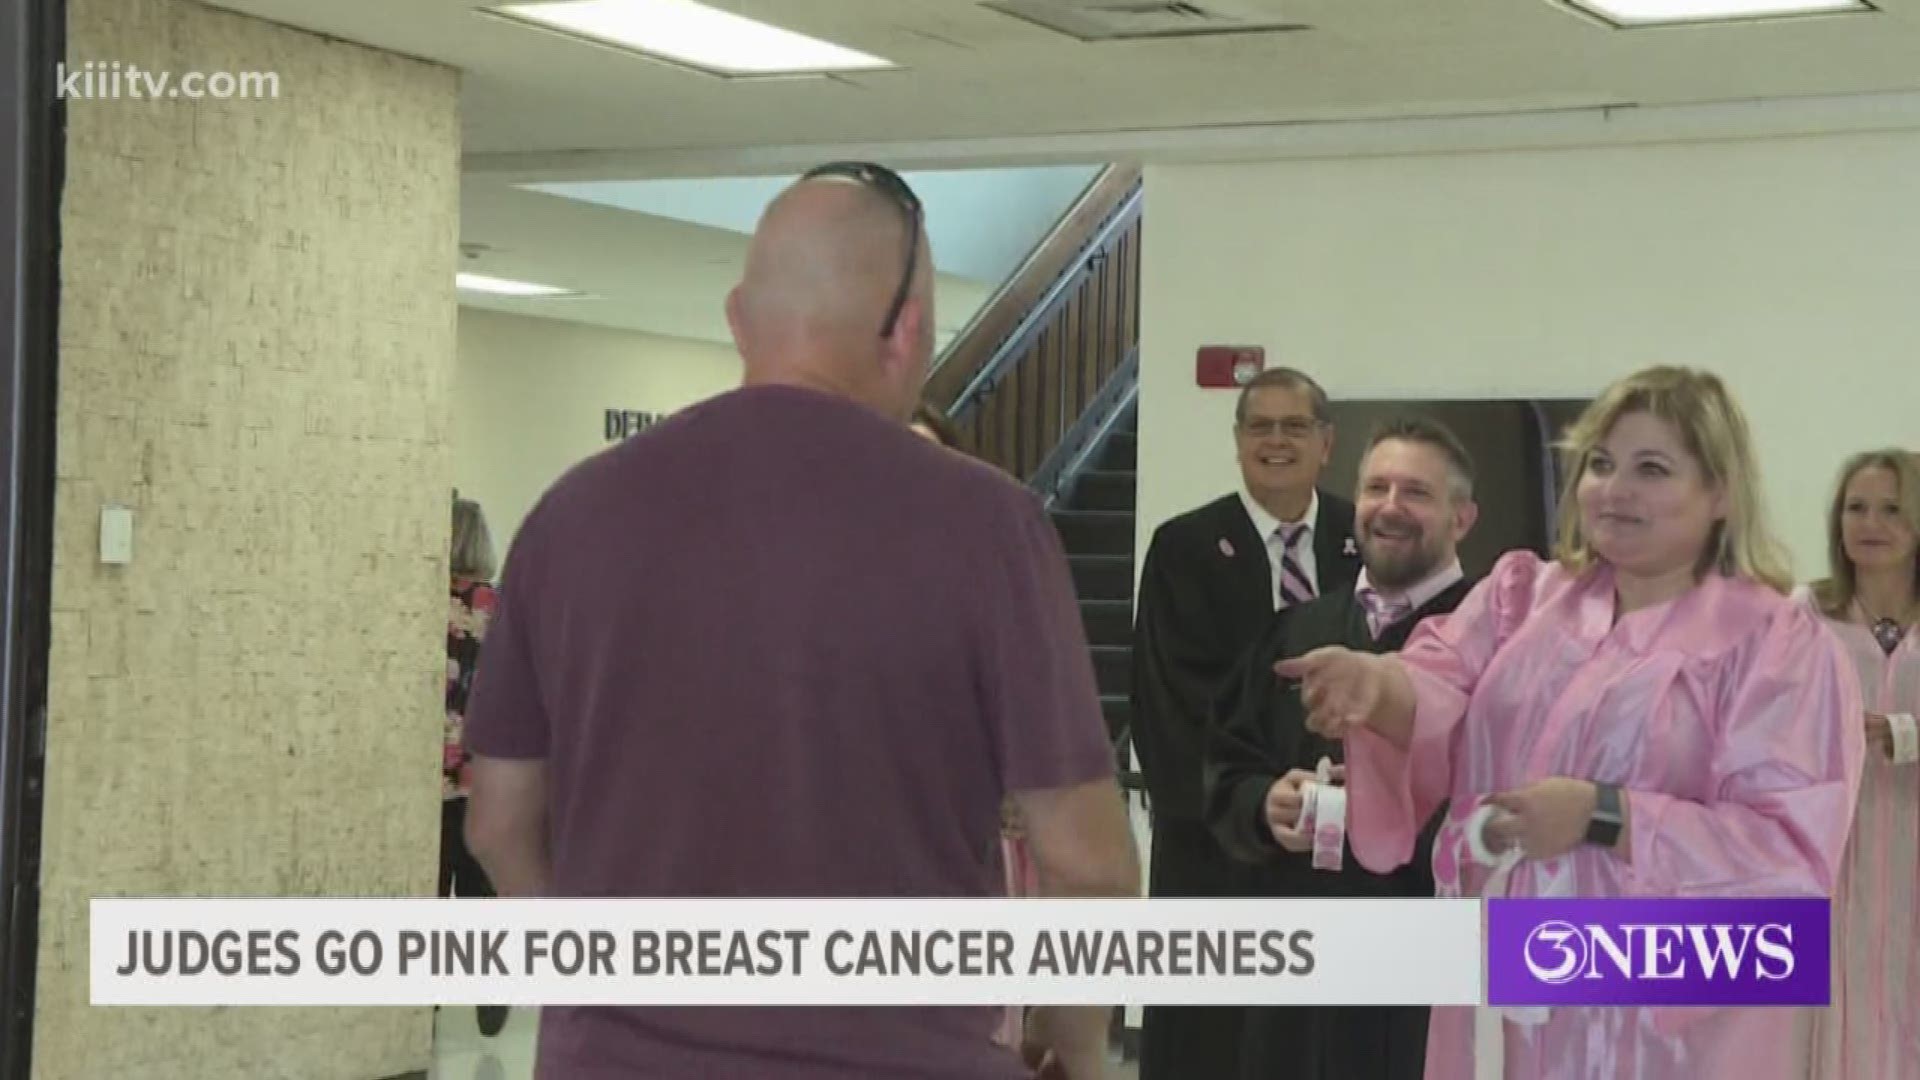 The Nueces County Courthouse is getting into the spirit and doing their part to raise awareness for breast cancer this month.